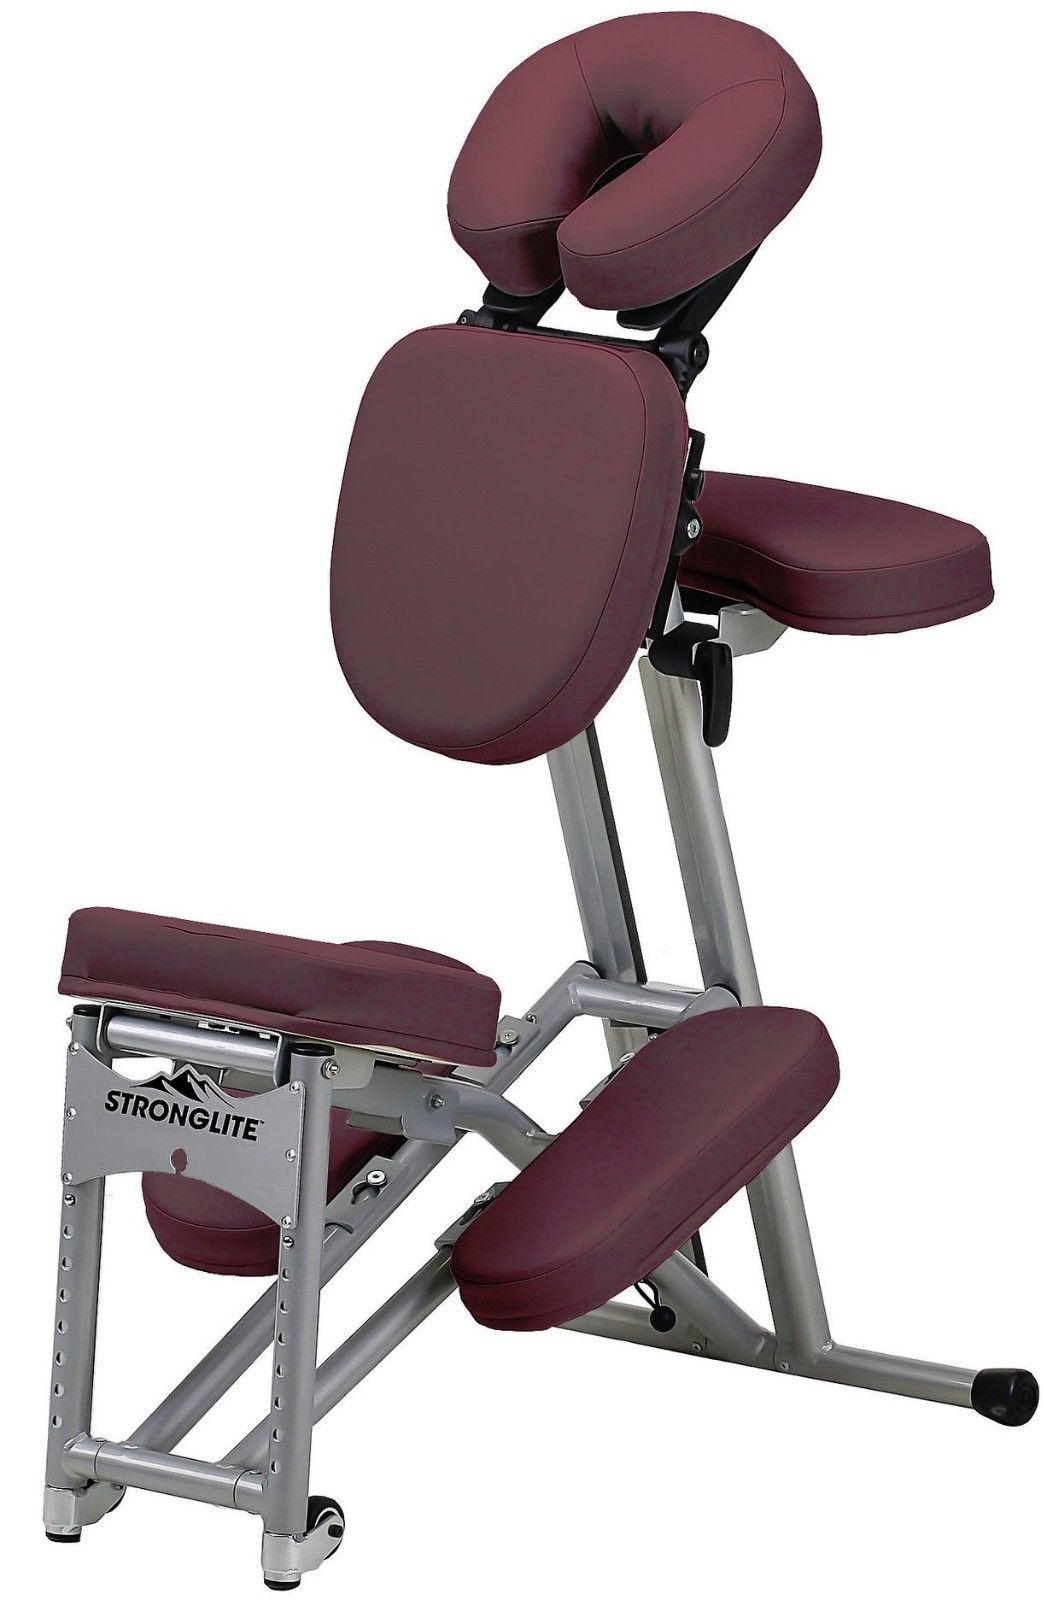 Ergo Pro II Portable Massage Chair Package - Massage Chair & Table